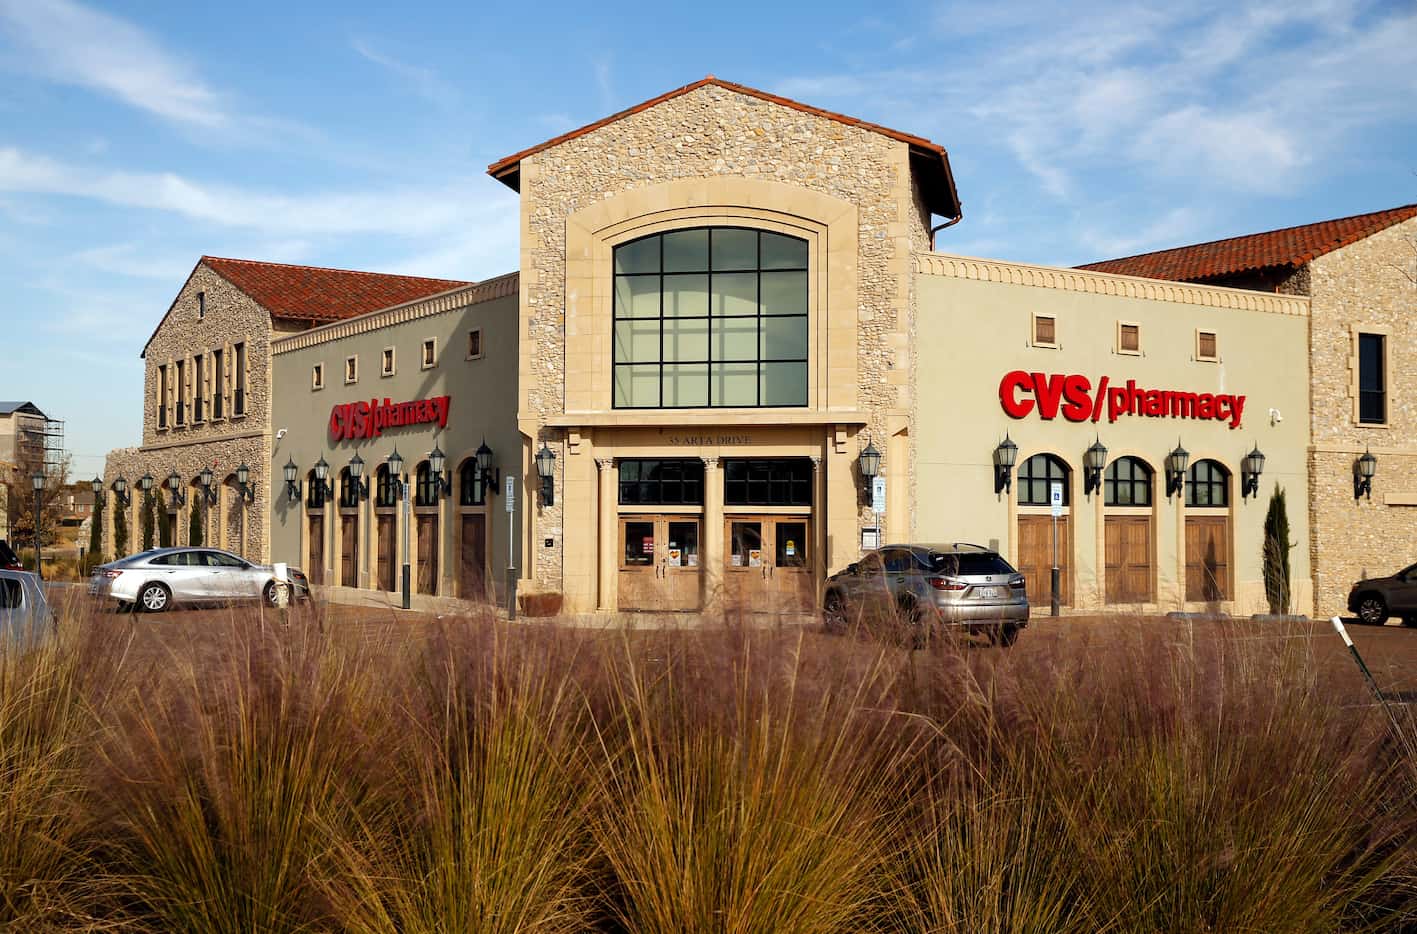 The CVS Pharmacy is unlike any other in the Entrada development in Westlake, Texas.